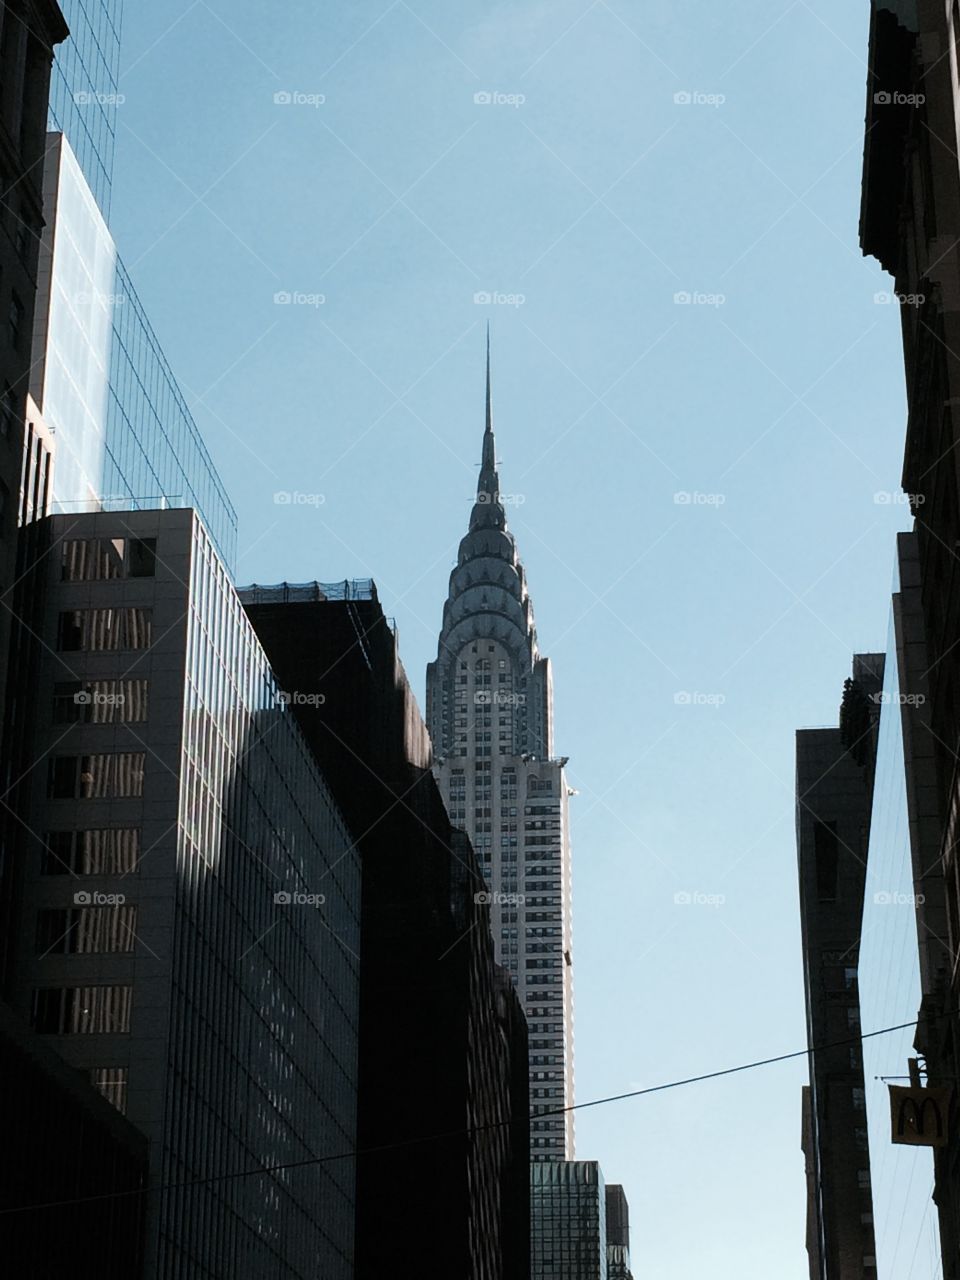 The Chrysler Building ... maybe the most beautiful skyscraper in NY.